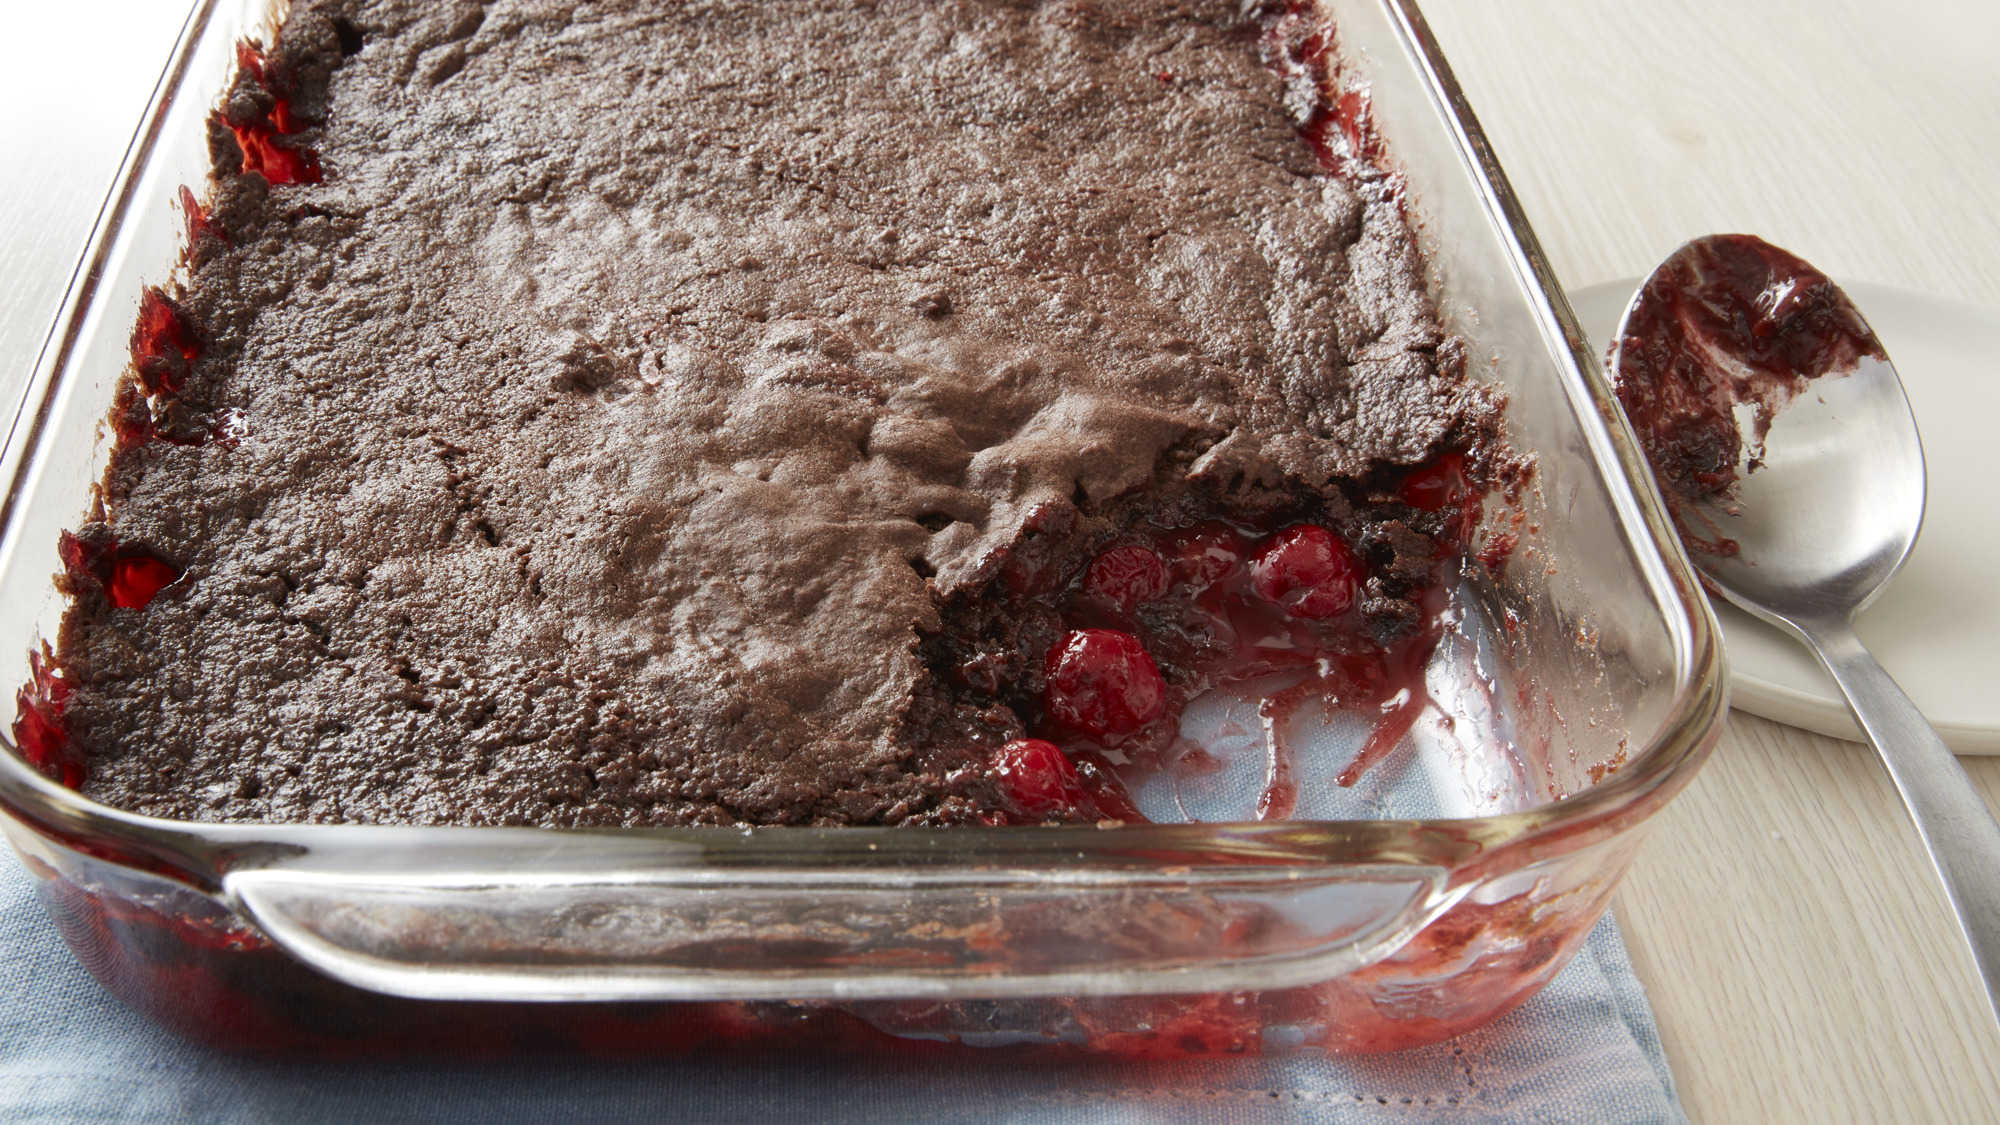 Chocolate Cherry Sheet Cake with Fudge Frosting - The Food Charlatan